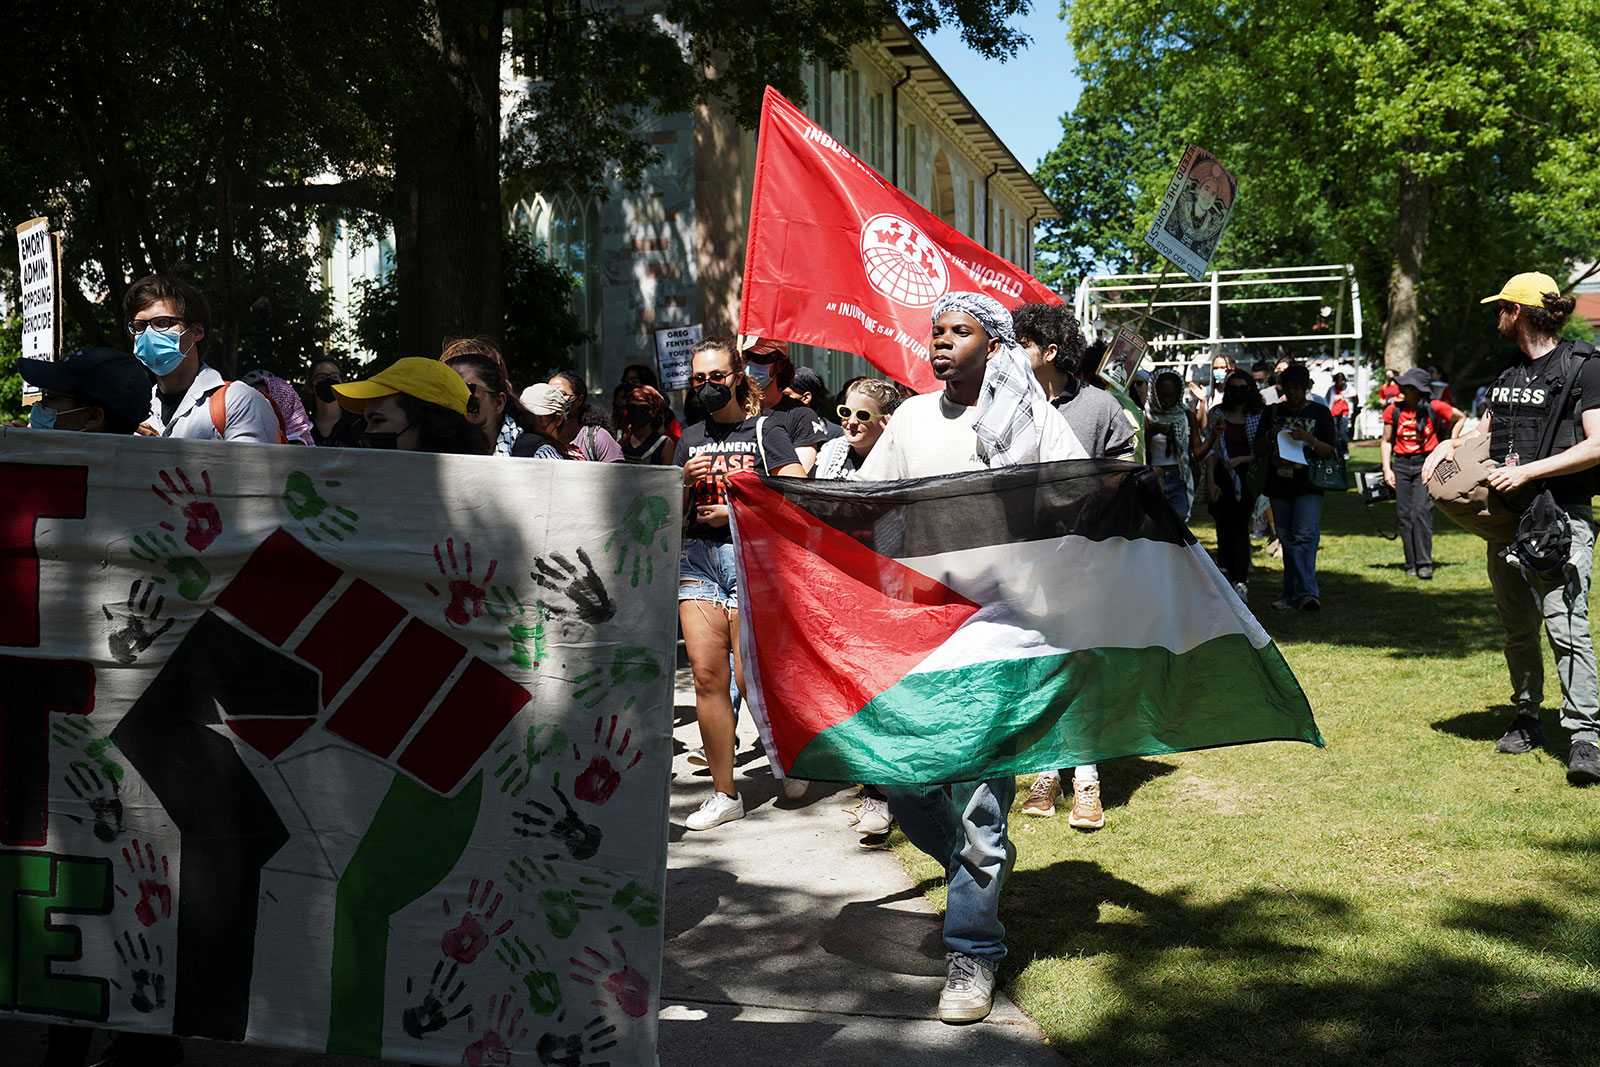 Protesters march to an admissions building at Emory University, in Atlanta, Georgia, on Wednesday, May 1.